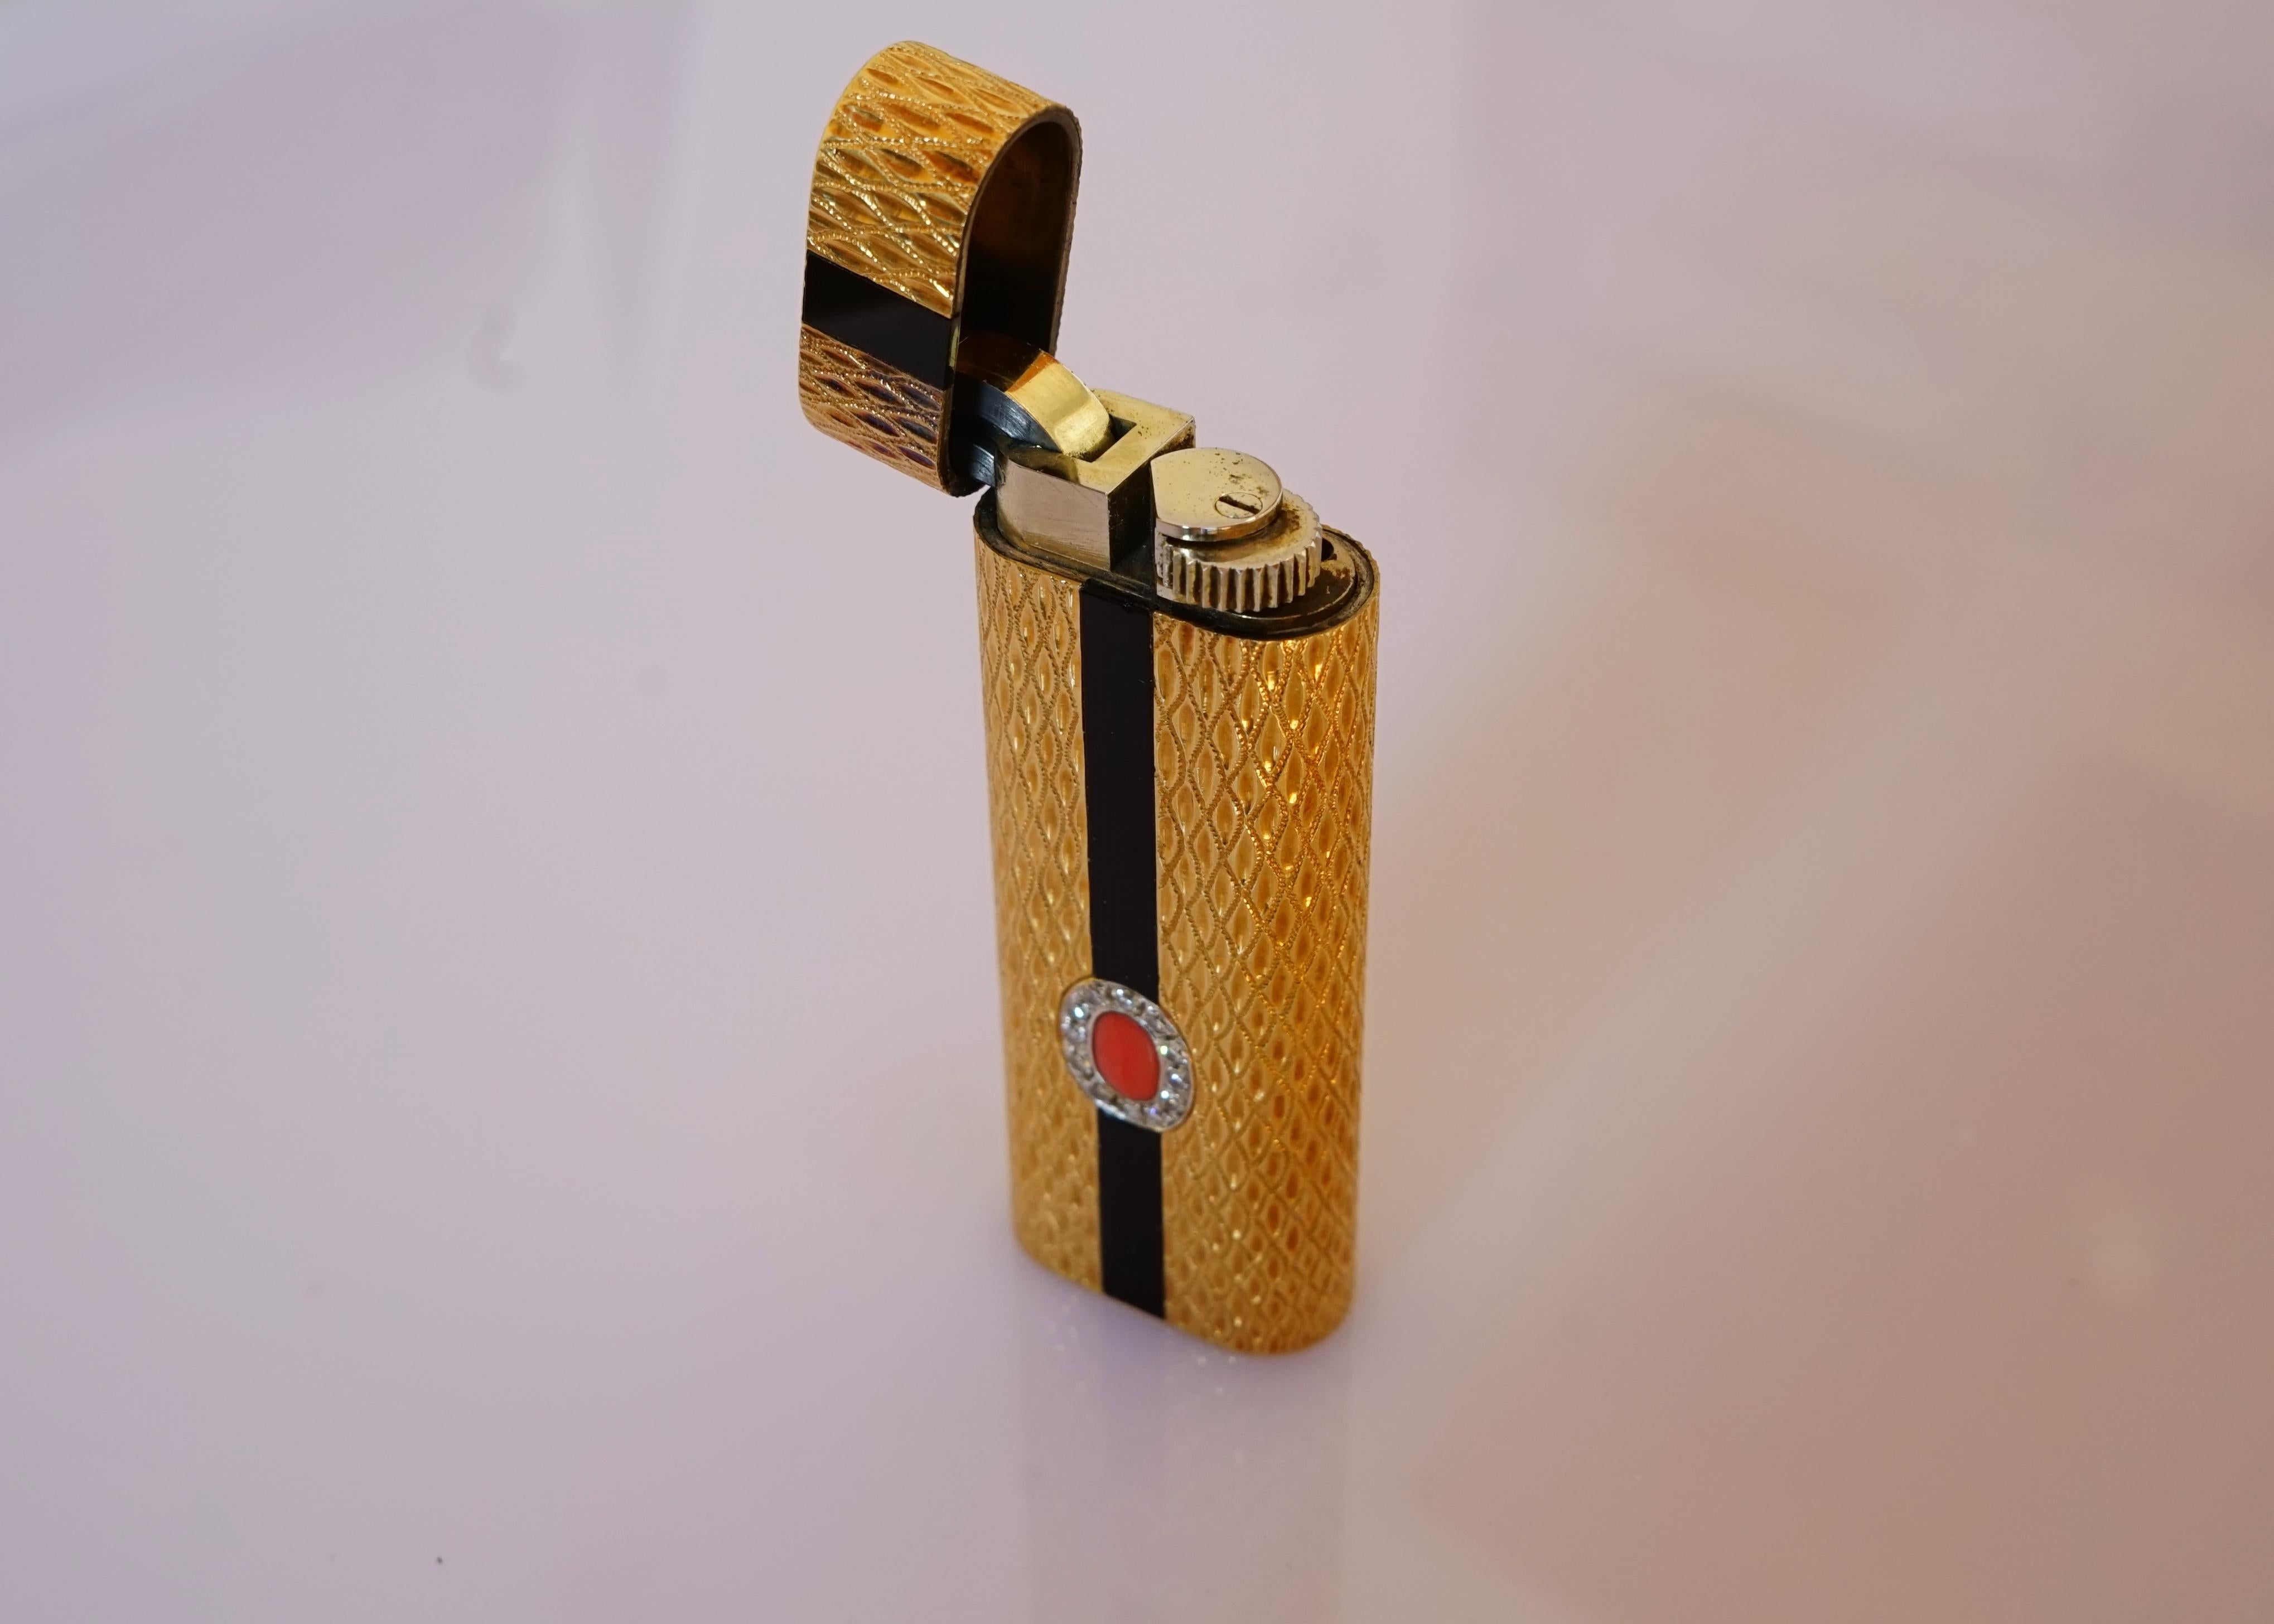 A beautiful lighter from Cartier with 18K gold, diamonds, and their classic black onyx, coral combination.

Please watch the video for the full details.